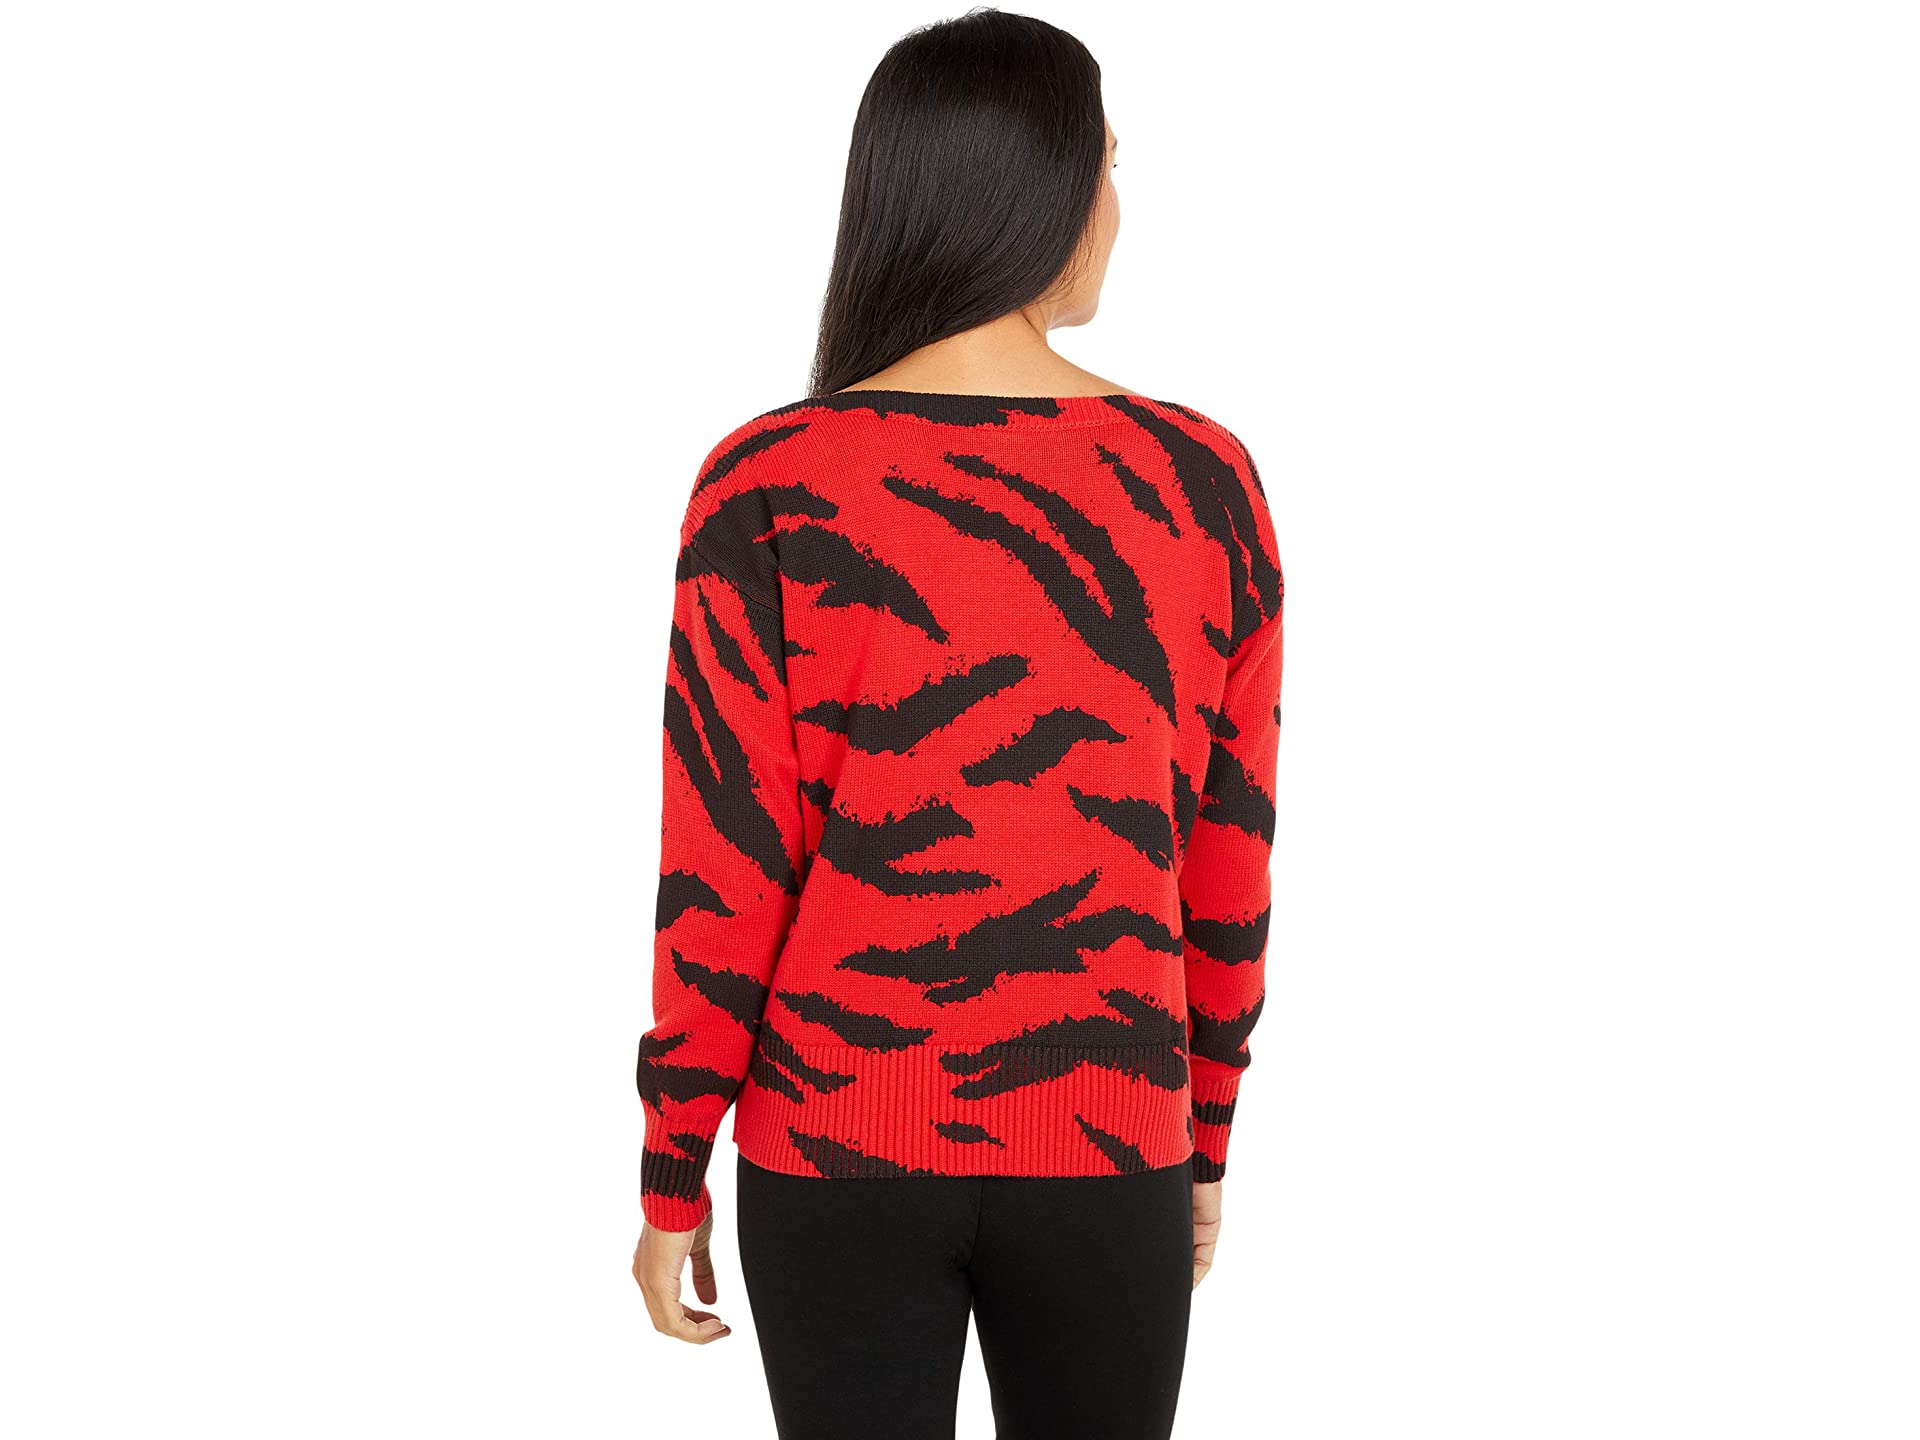 Well Red Boatneck Sweater - The Posh Loft